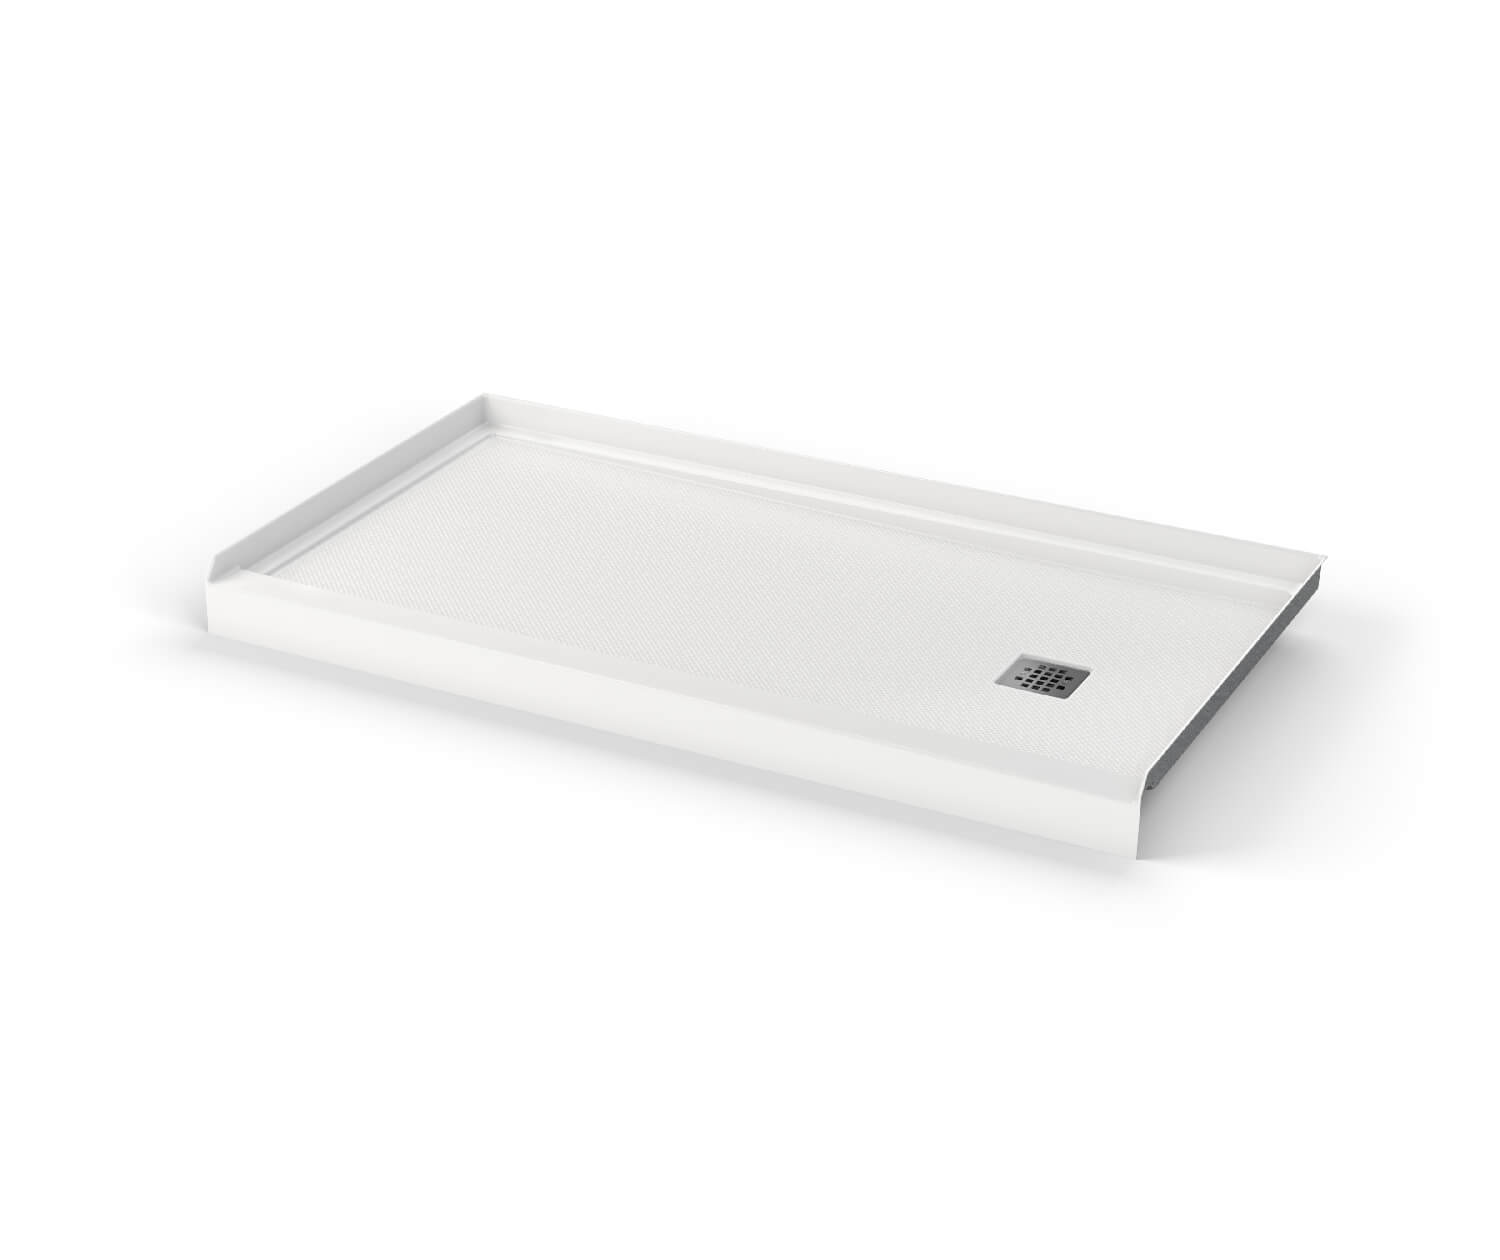 B3Square 6030 Acrylic Alcove Shower Base in White with Anti-slip 